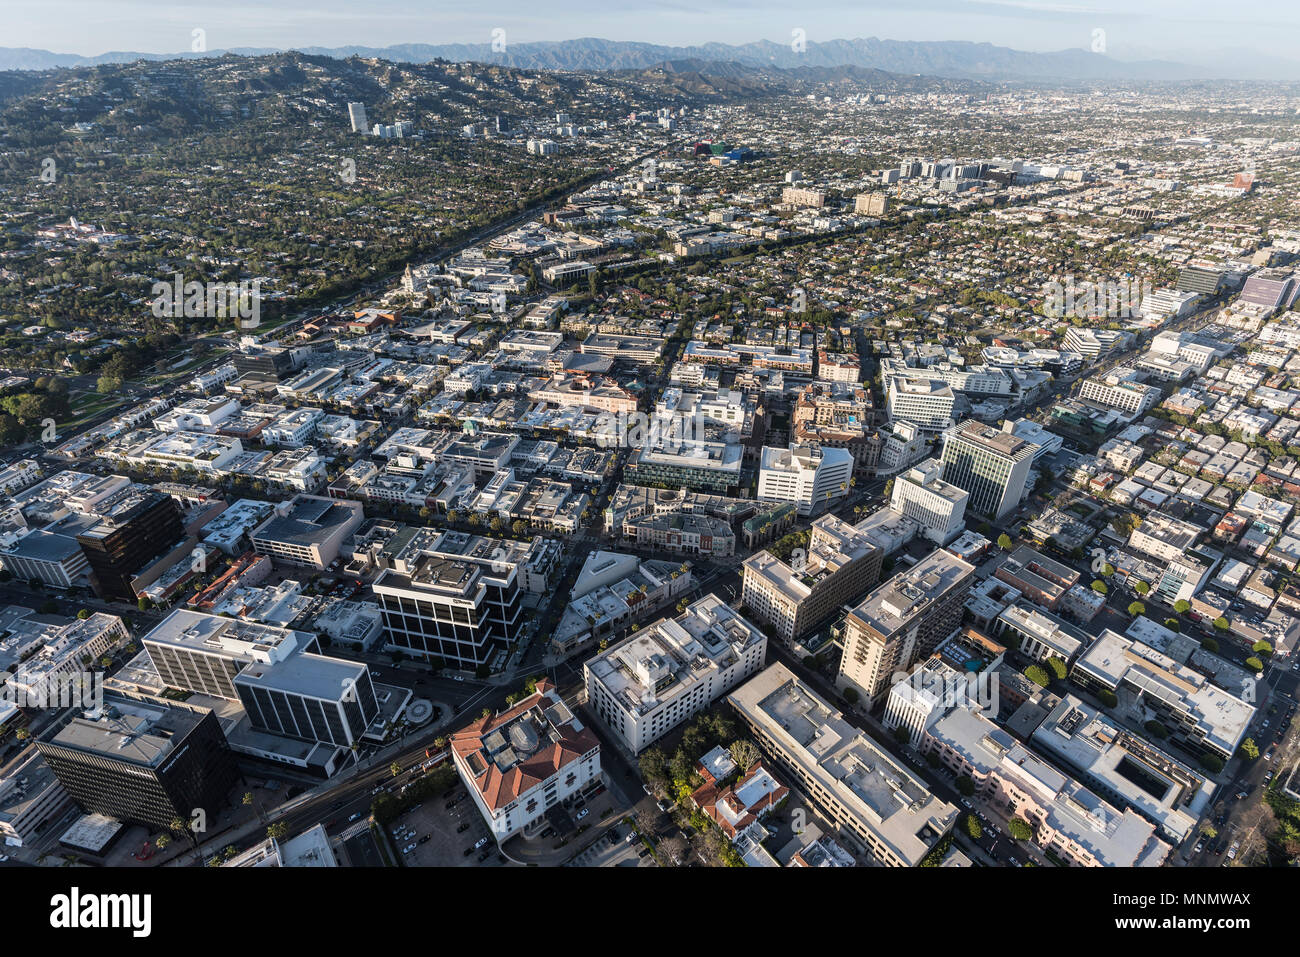 Beverly Hills, California, USA - April 18, 2018:  Aerial view of Wilshire Bl and downtown Beverly Hills with Los Angeles and West Hollywood in the bac Stock Photo